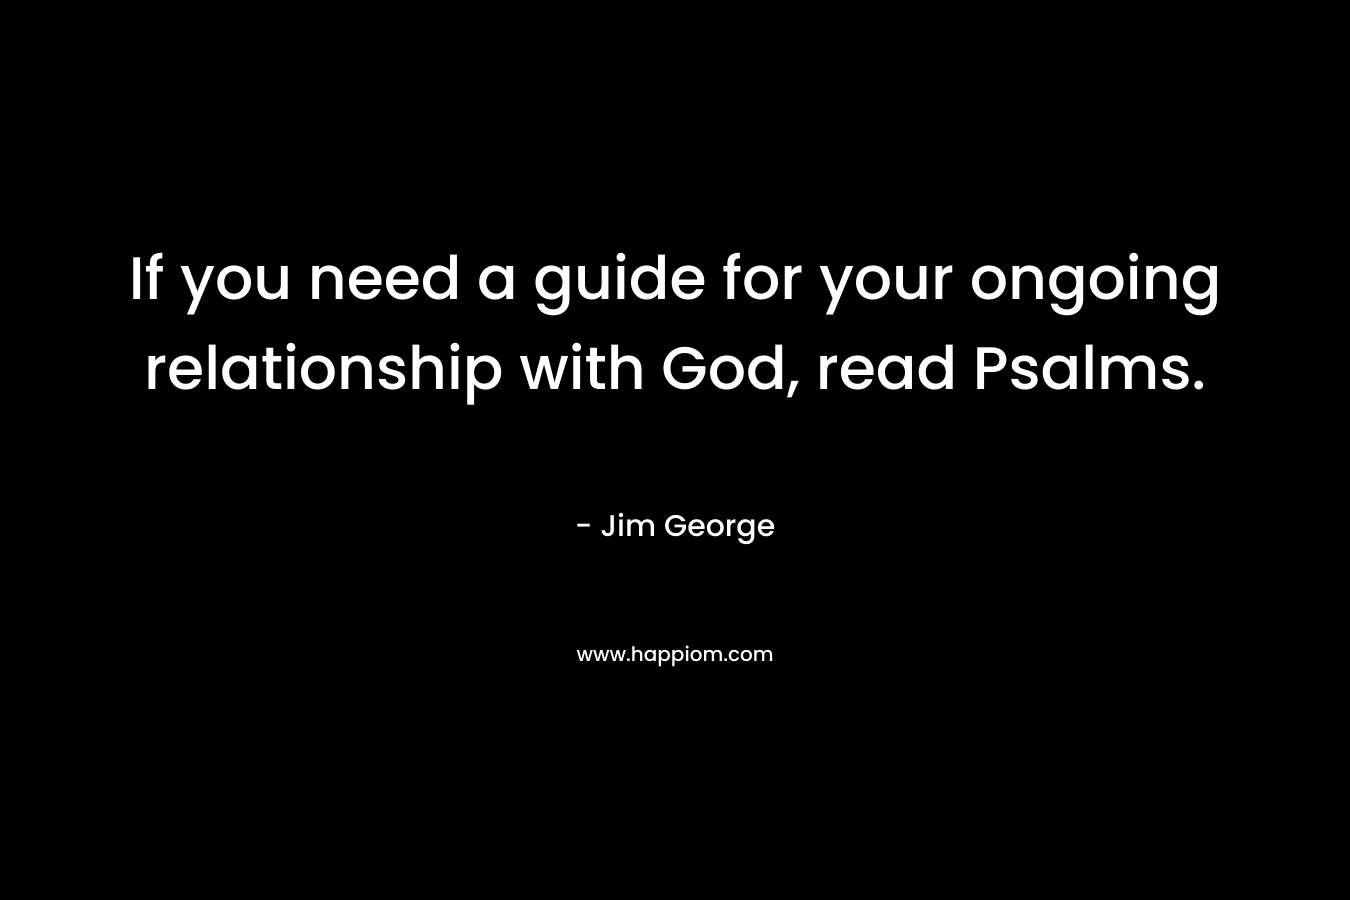 If you need a guide for your ongoing relationship with God, read Psalms. – Jim George